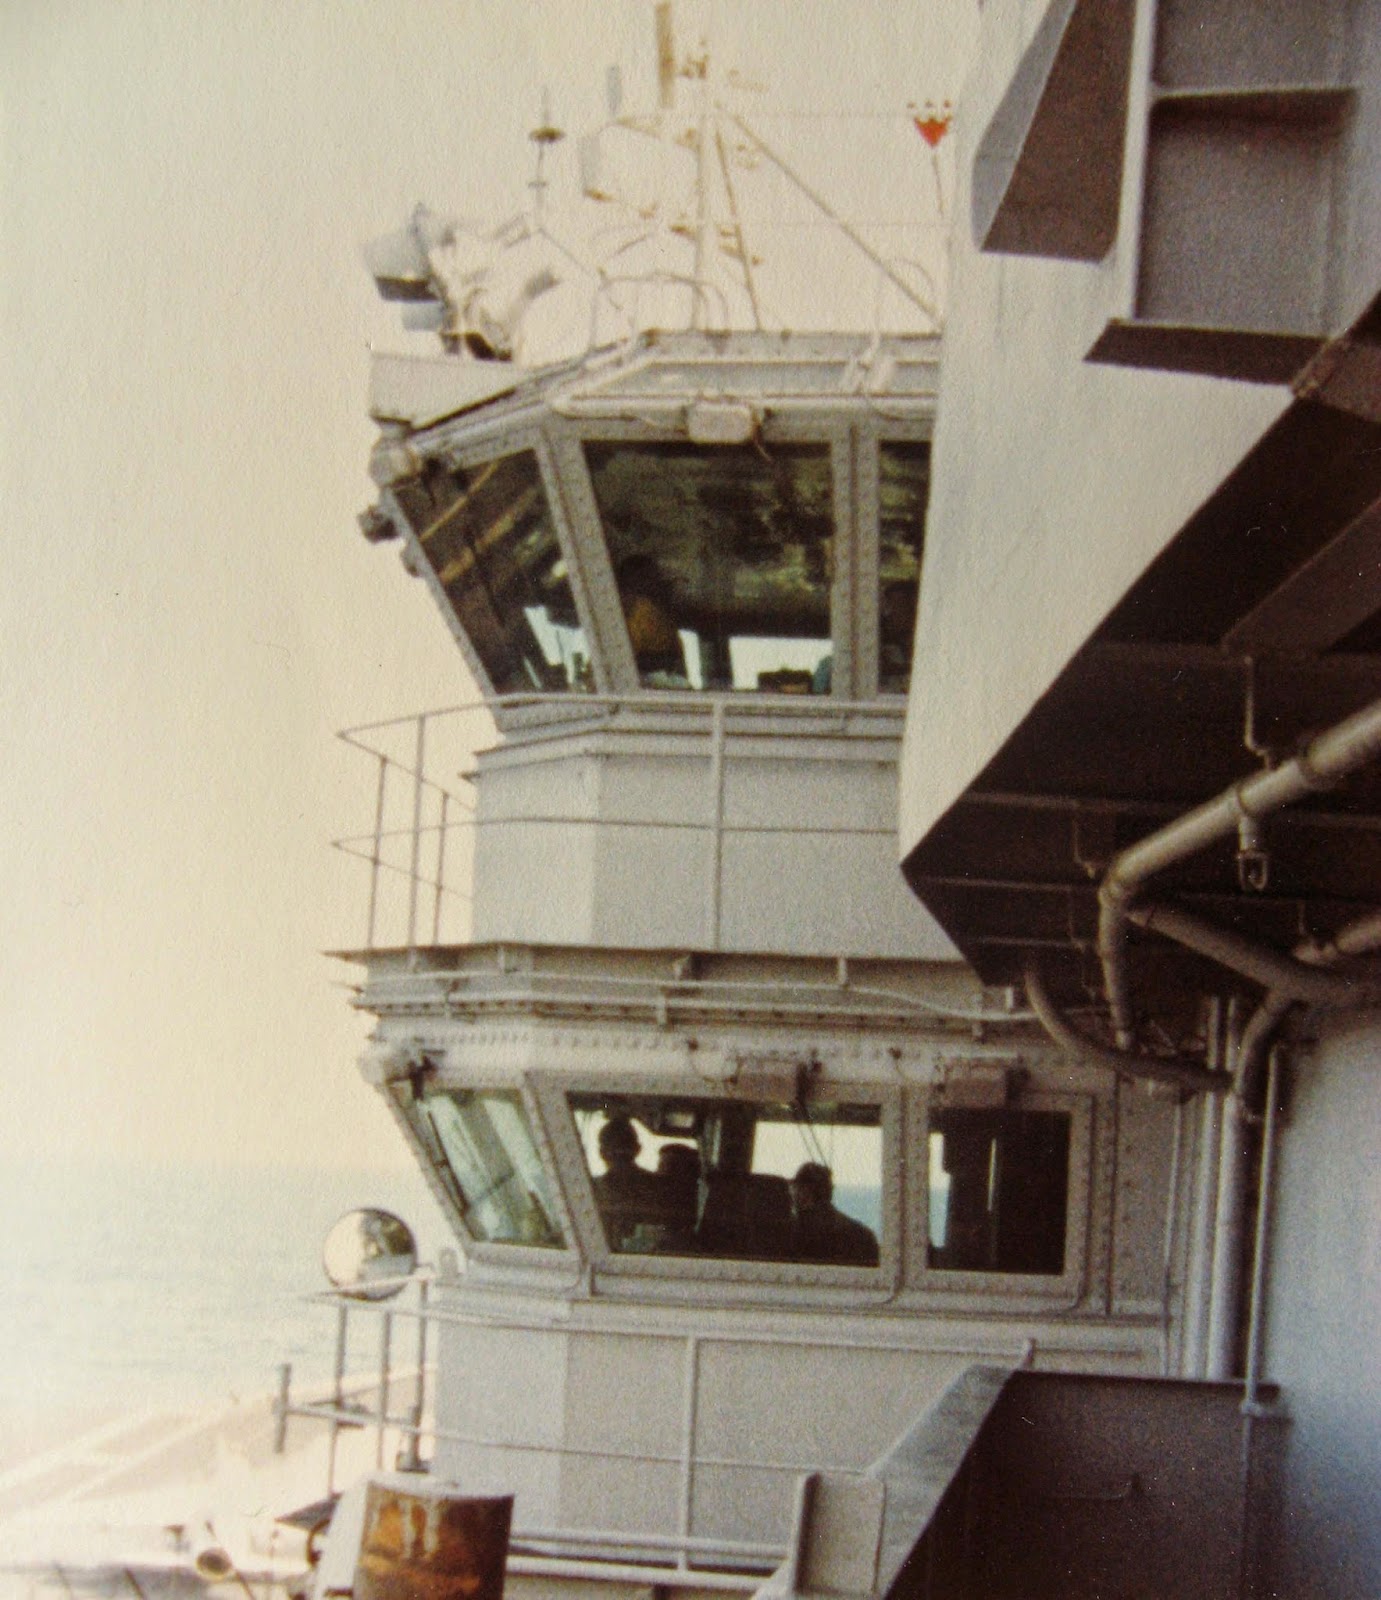 I snapped one of the Top 2 levels of the Island on The USS NIMITZ where the captain & Air Boss ran the show January 1983